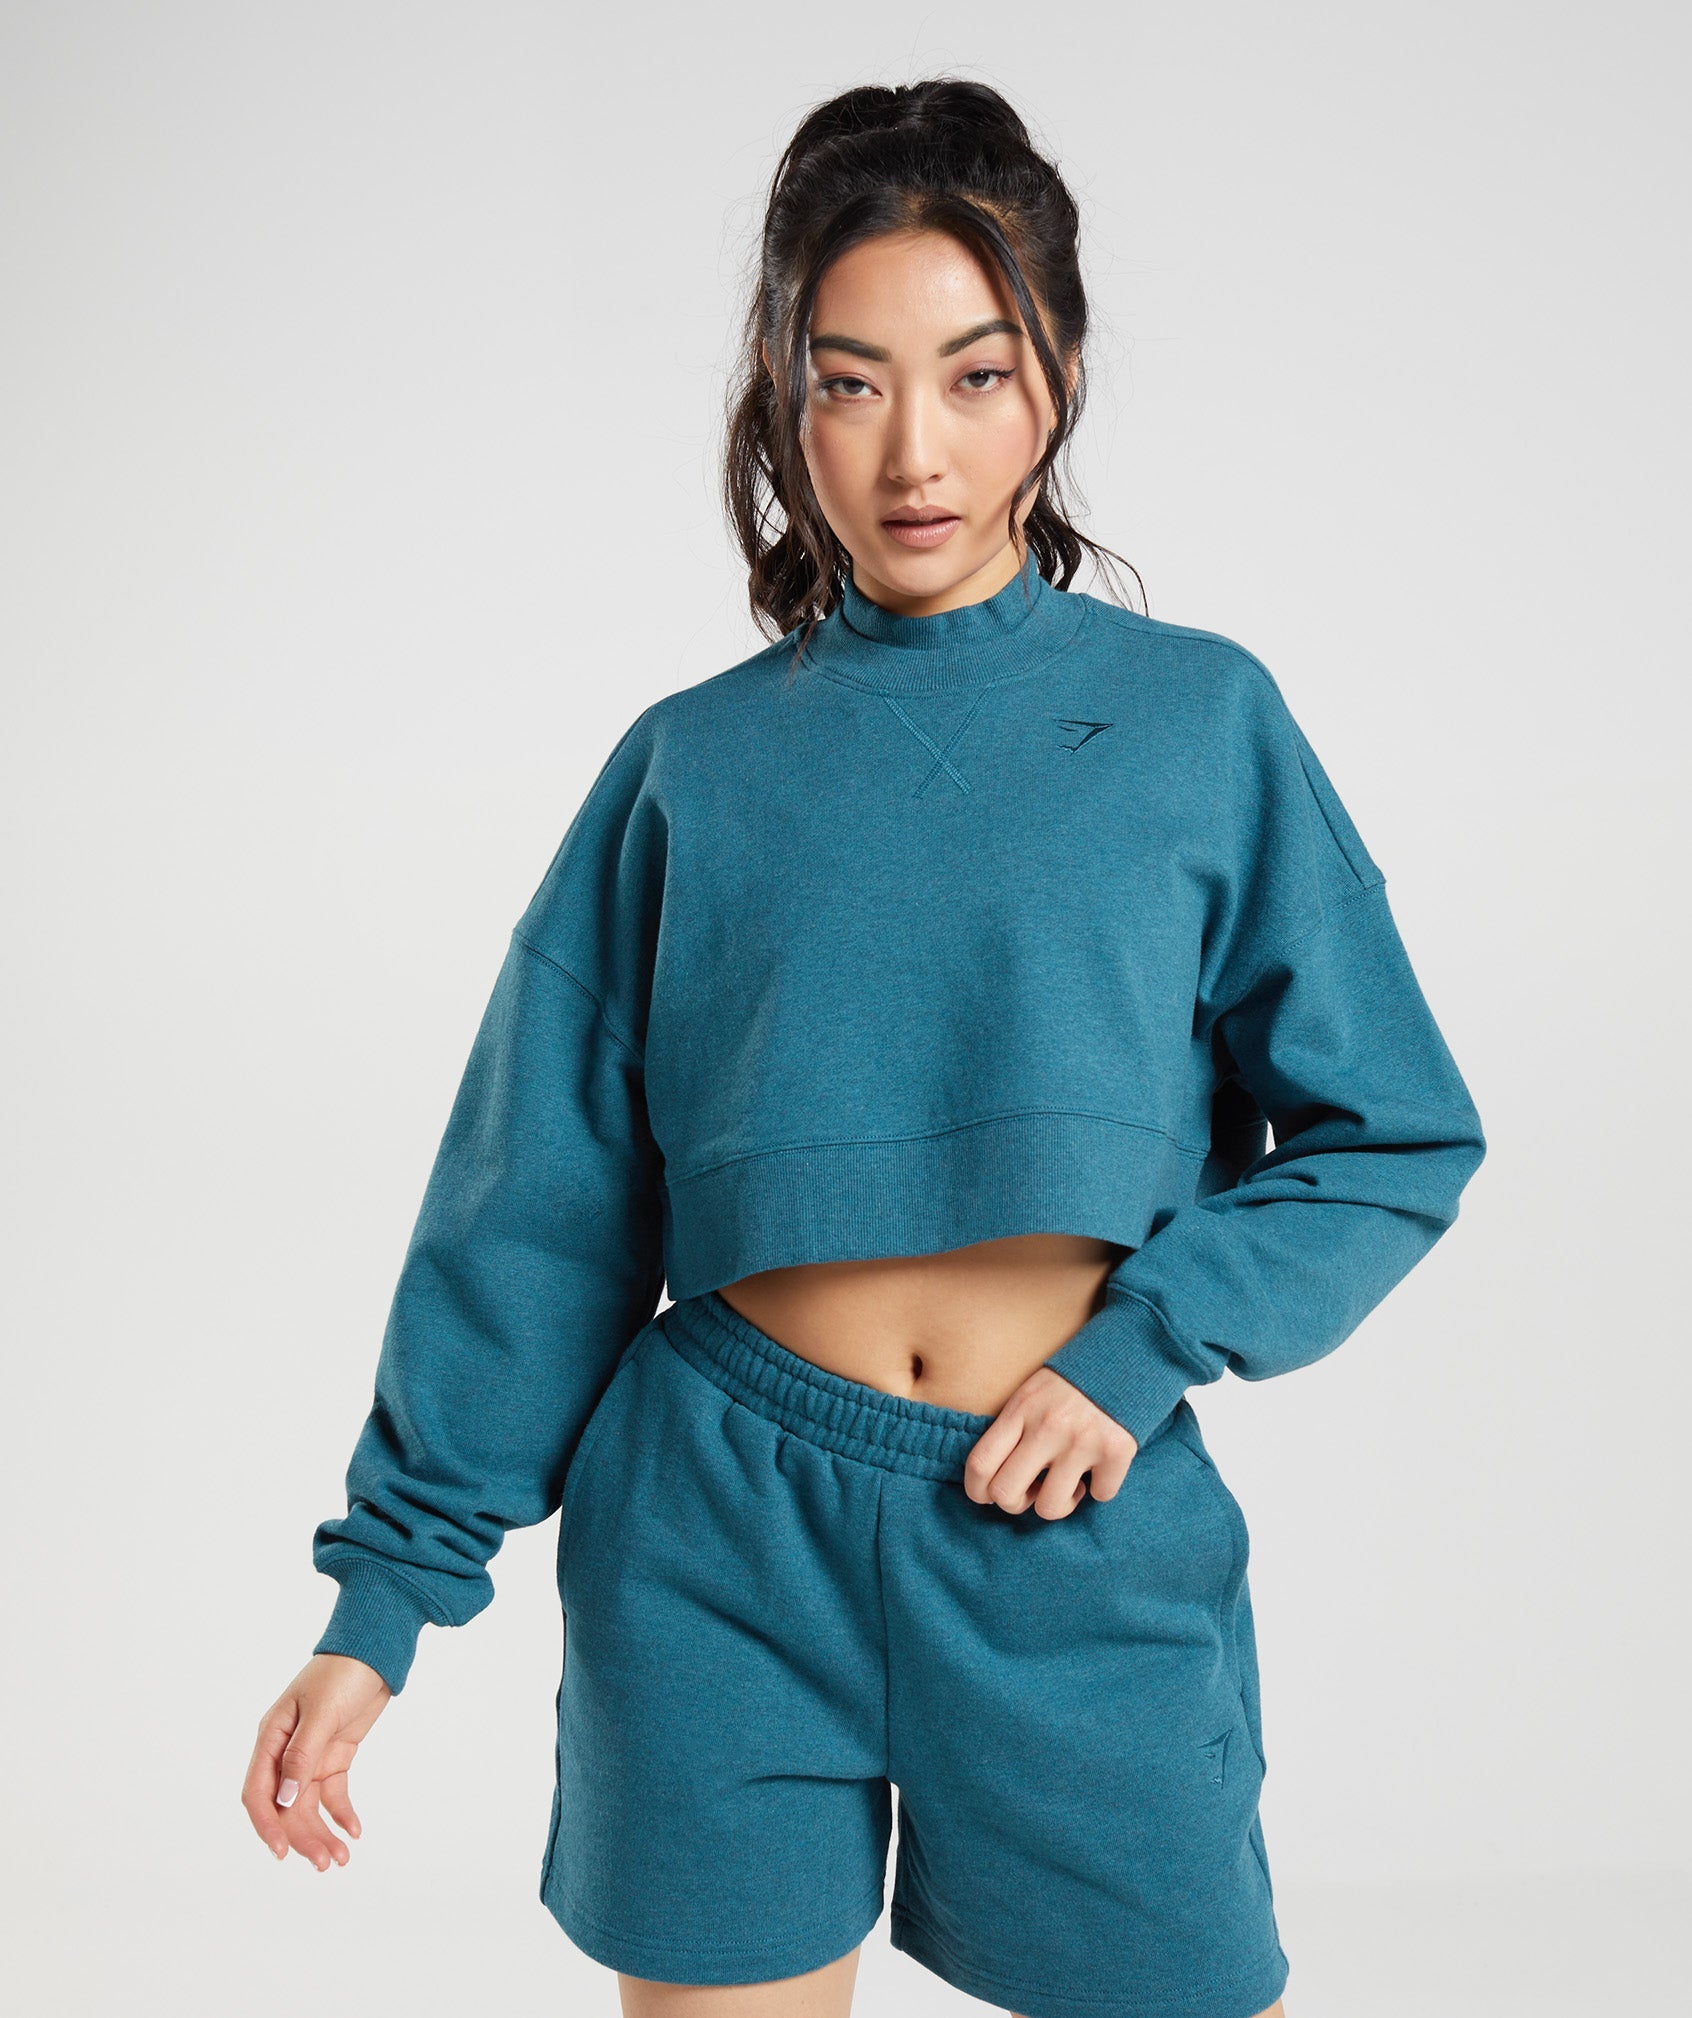 Rest Day Sweats Cropped Pullover in Steel Blue Marl - view 1